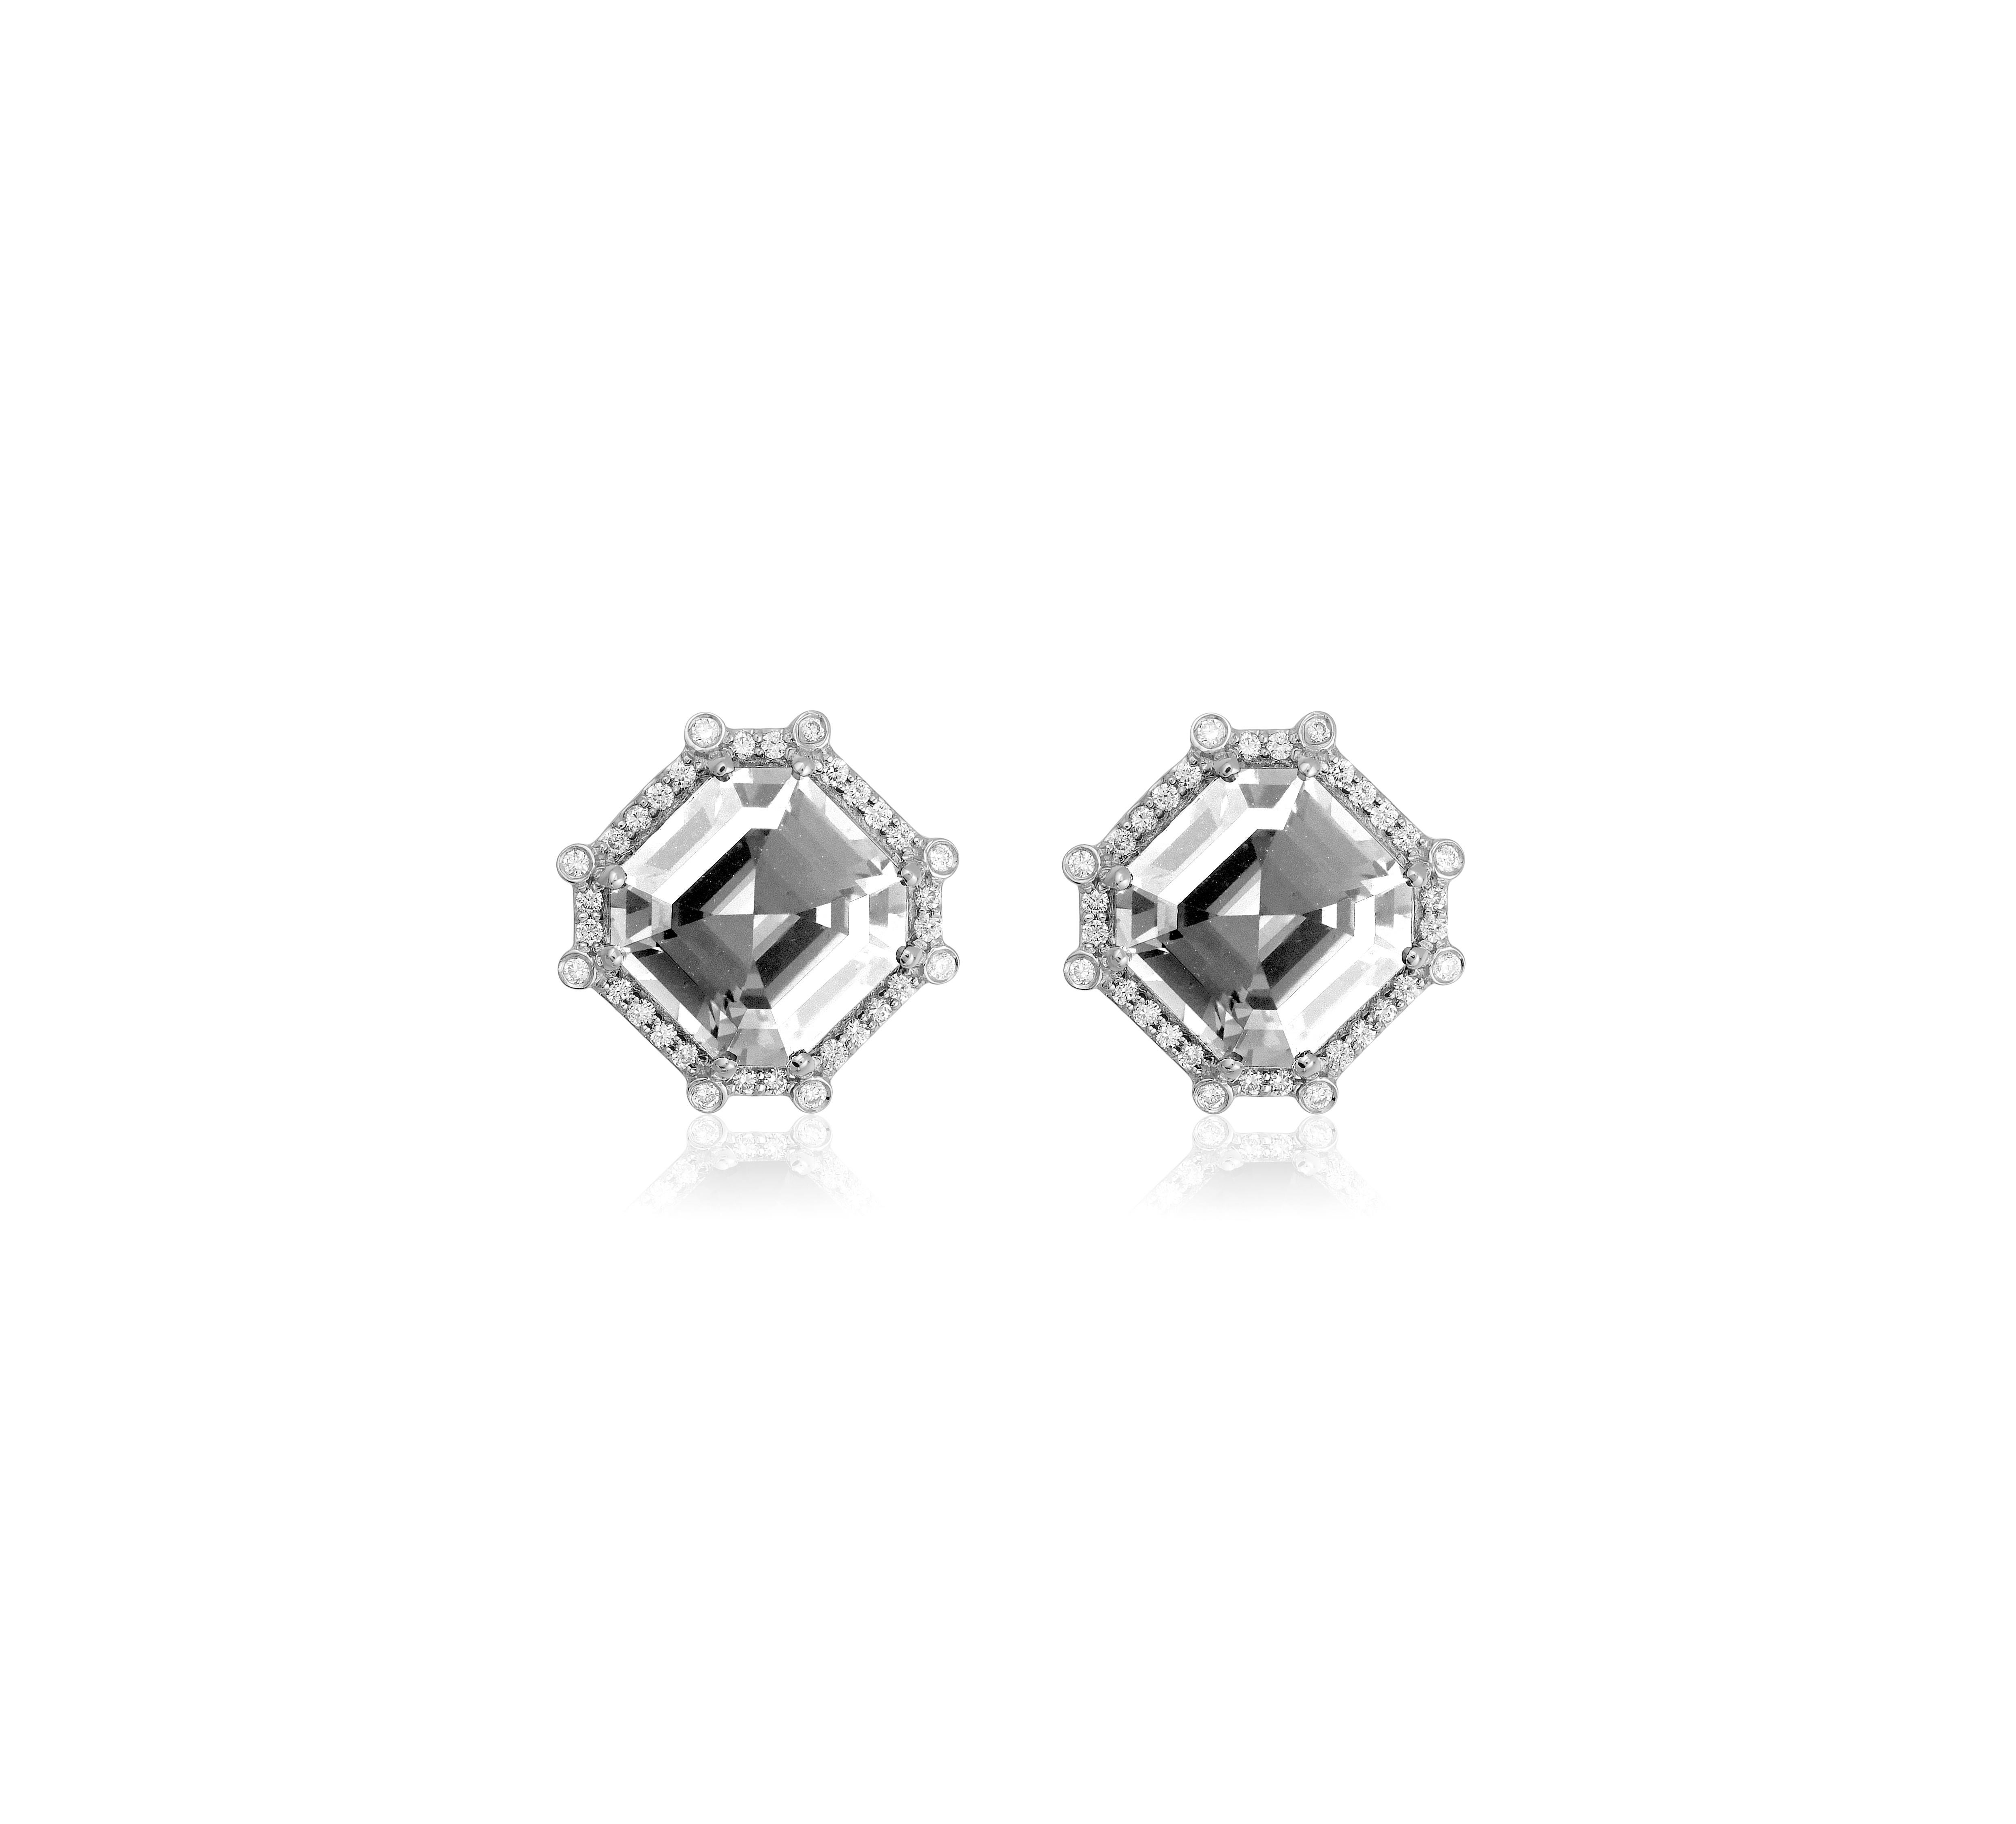 Rock Crystal & Diamond Octagon Studs in 18K White Gold from 'Gossip' Collection
 Stone Size: 9 x 9 mm
 Diamonds: G-H / VS, Approx Wt : 0.23 Cts